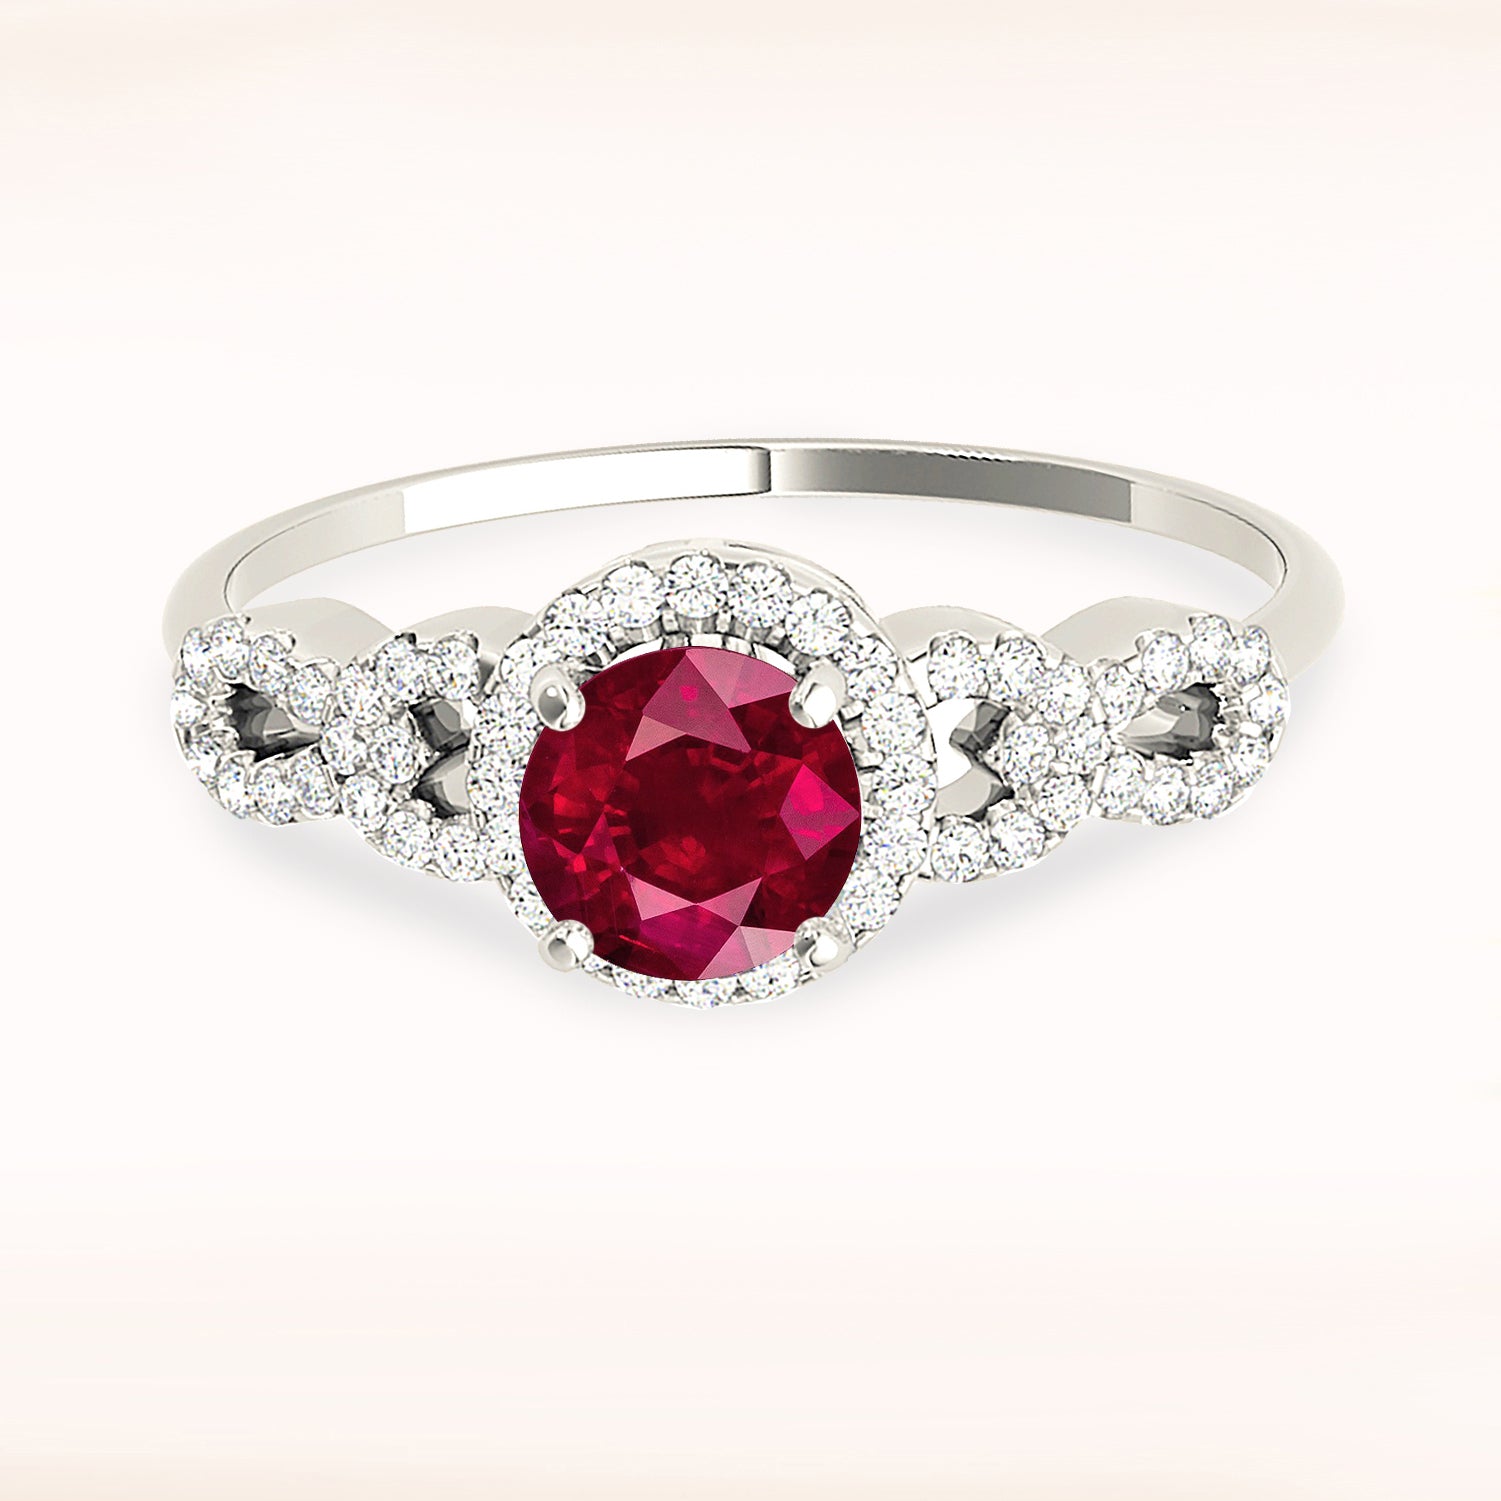 1.35 ct. Genuine Ruby Ring With 0.25 ctw. Diamond Halo, Open Rounded Fancy Diamond Band, High Setting | Ruby Halo Ring | Natural Ruby Ring-in 14K/18K White, Yellow, Rose Gold and Platinum - Christmas Jewelry Gift -VIRABYANI